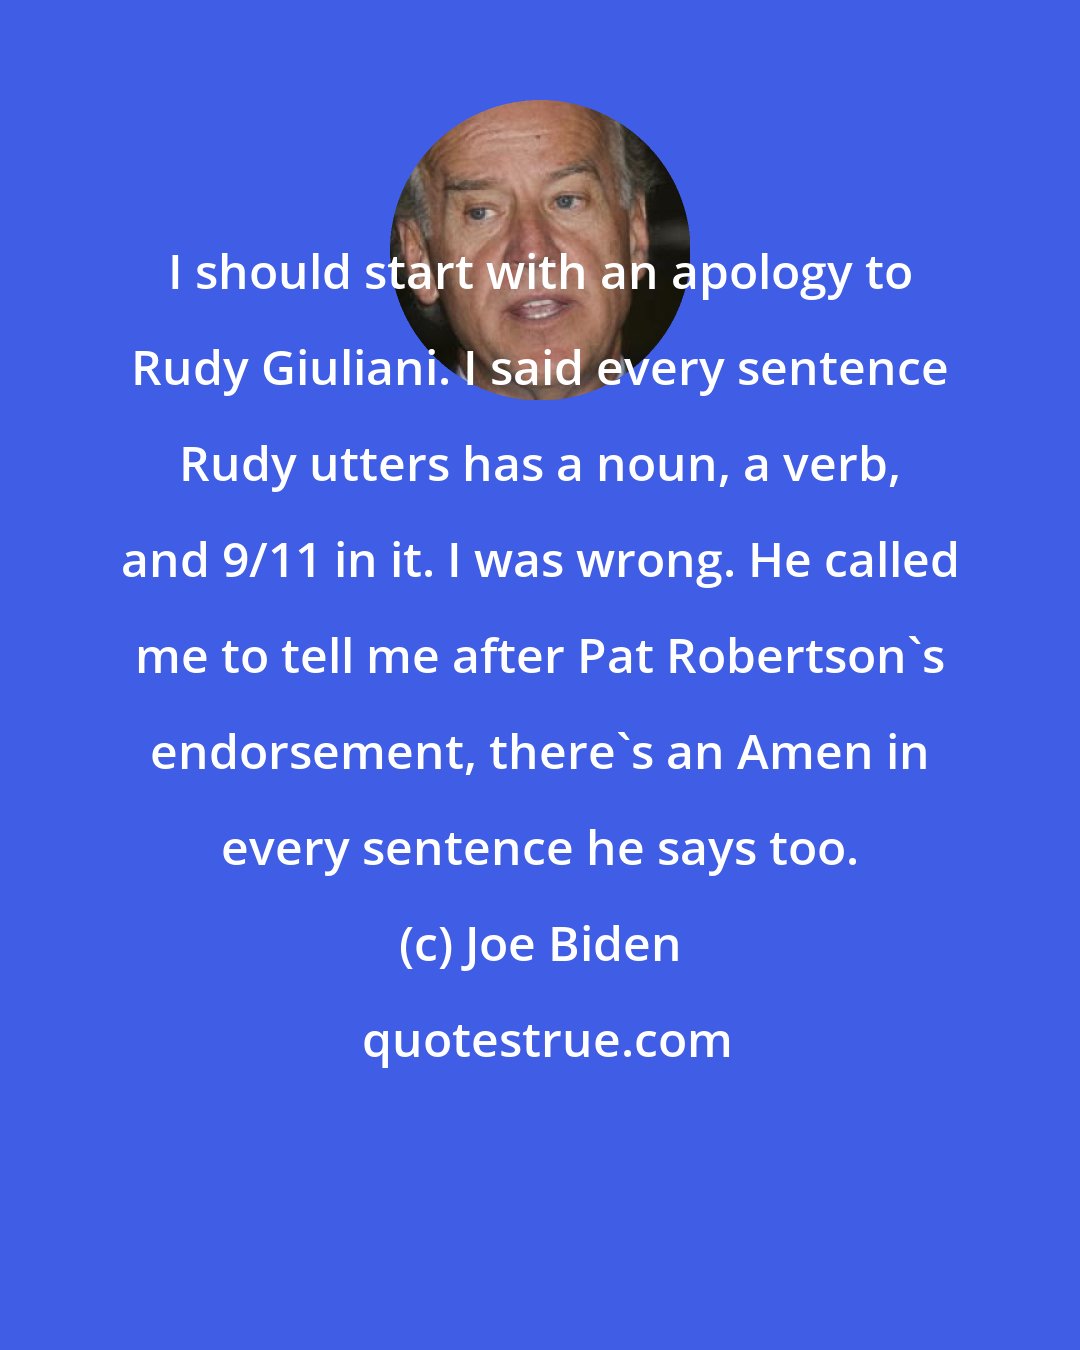 Joe Biden: I should start with an apology to Rudy Giuliani. I said every sentence Rudy utters has a noun, a verb, and 9/11 in it. I was wrong. He called me to tell me after Pat Robertson's endorsement, there's an Amen in every sentence he says too.